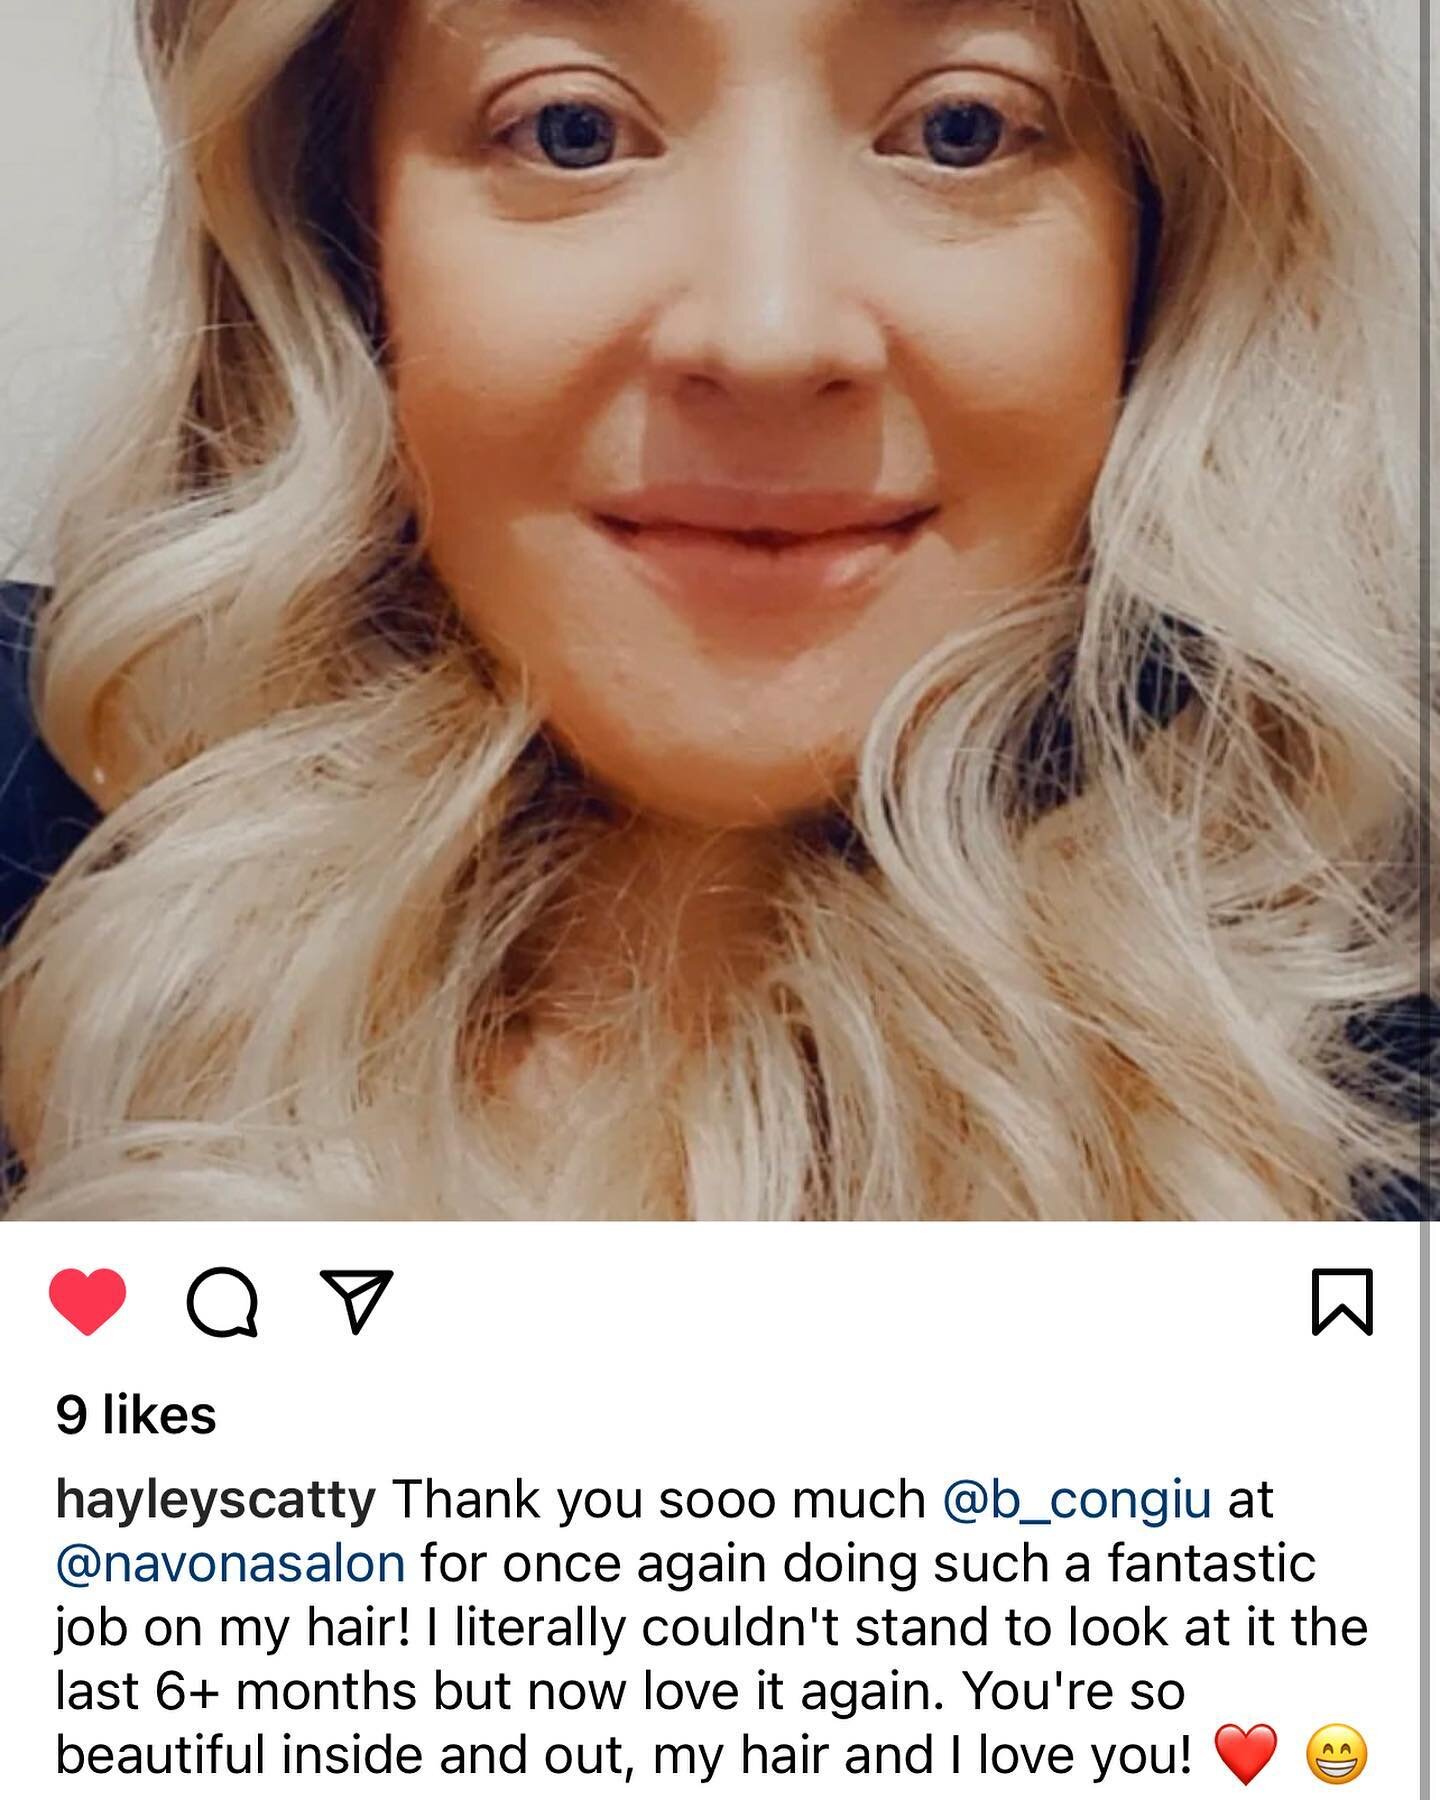 We love getting reviews like this it makes us love our job even more and always a pleasure @hayleyscatty best of luck for the arrival of your baby!!!